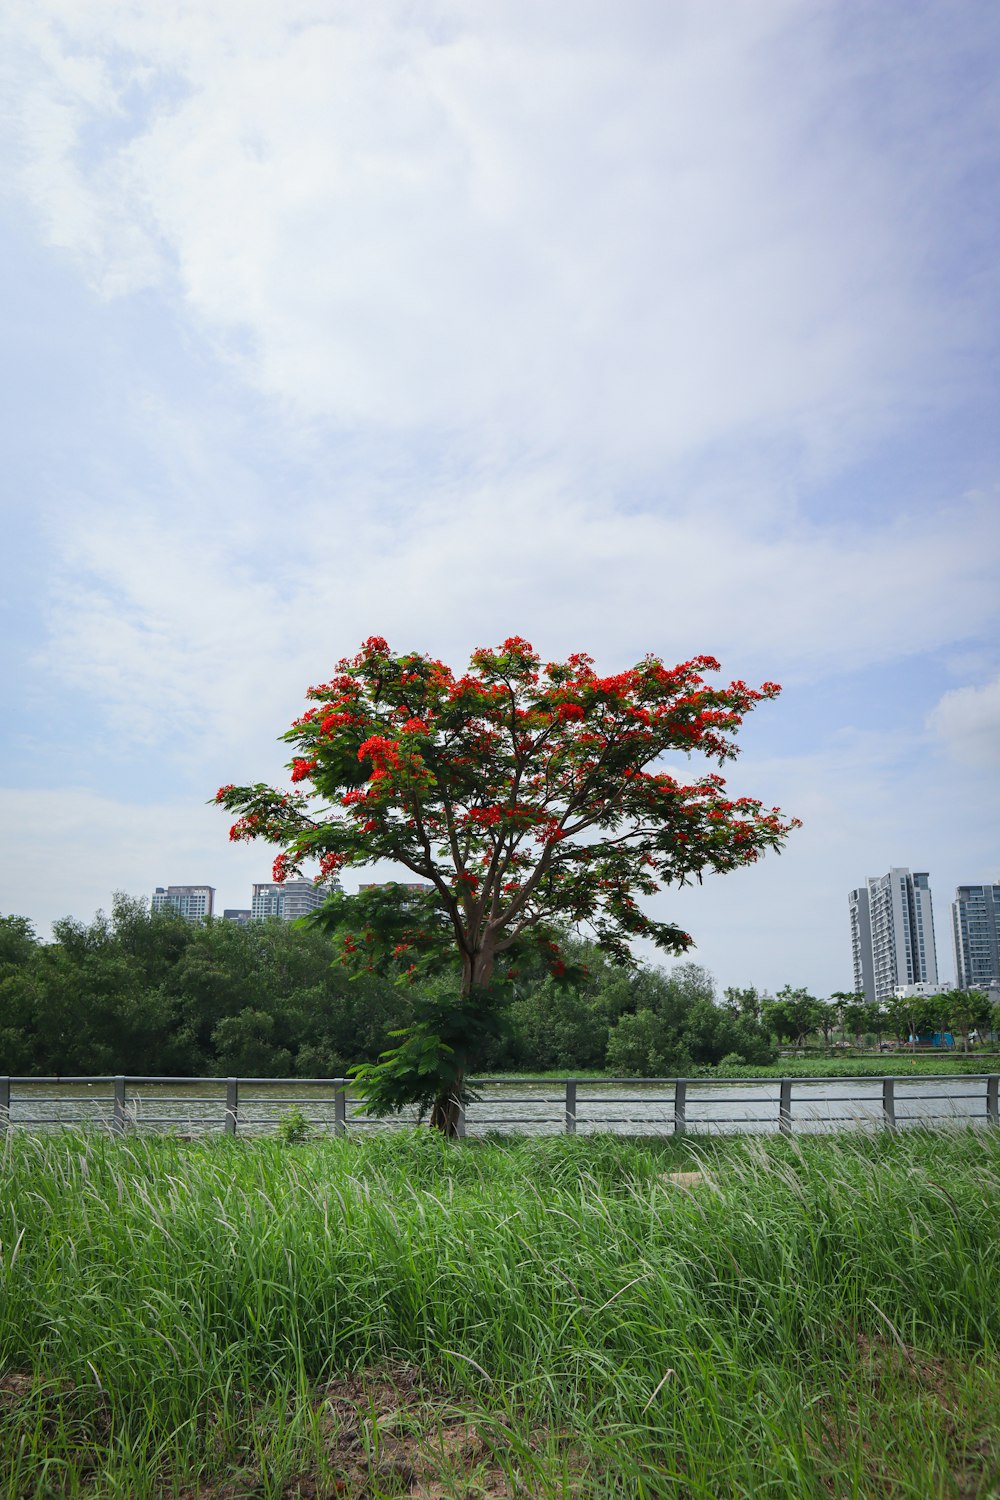 a tree with red flowers in a grassy field